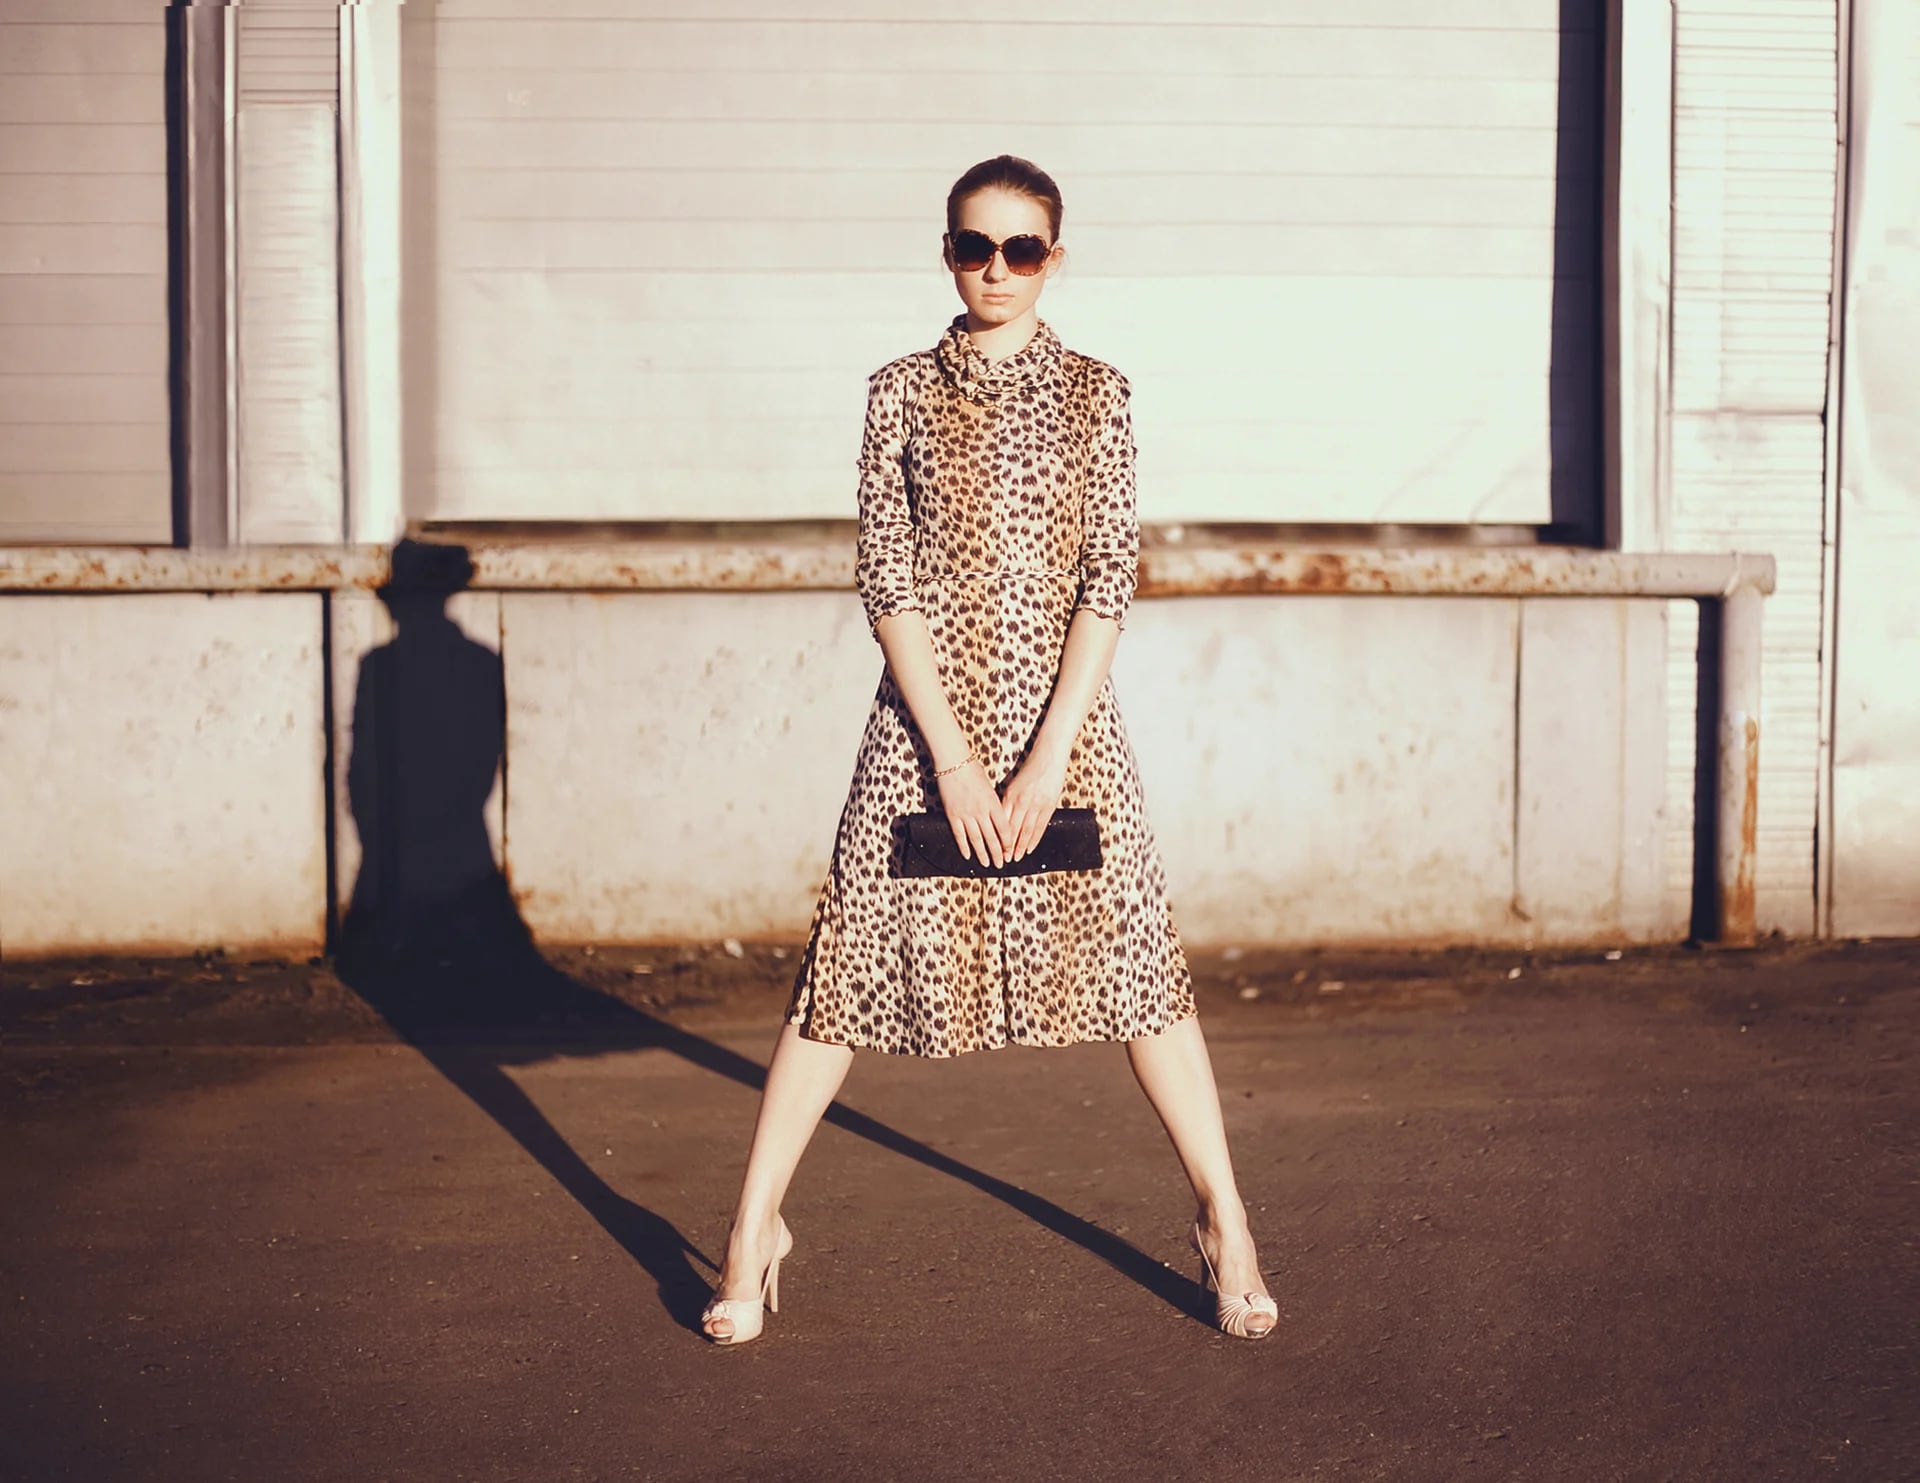 Stylish woman in a leopard dress, glasses and bag in the ghetto evening, street fashion.